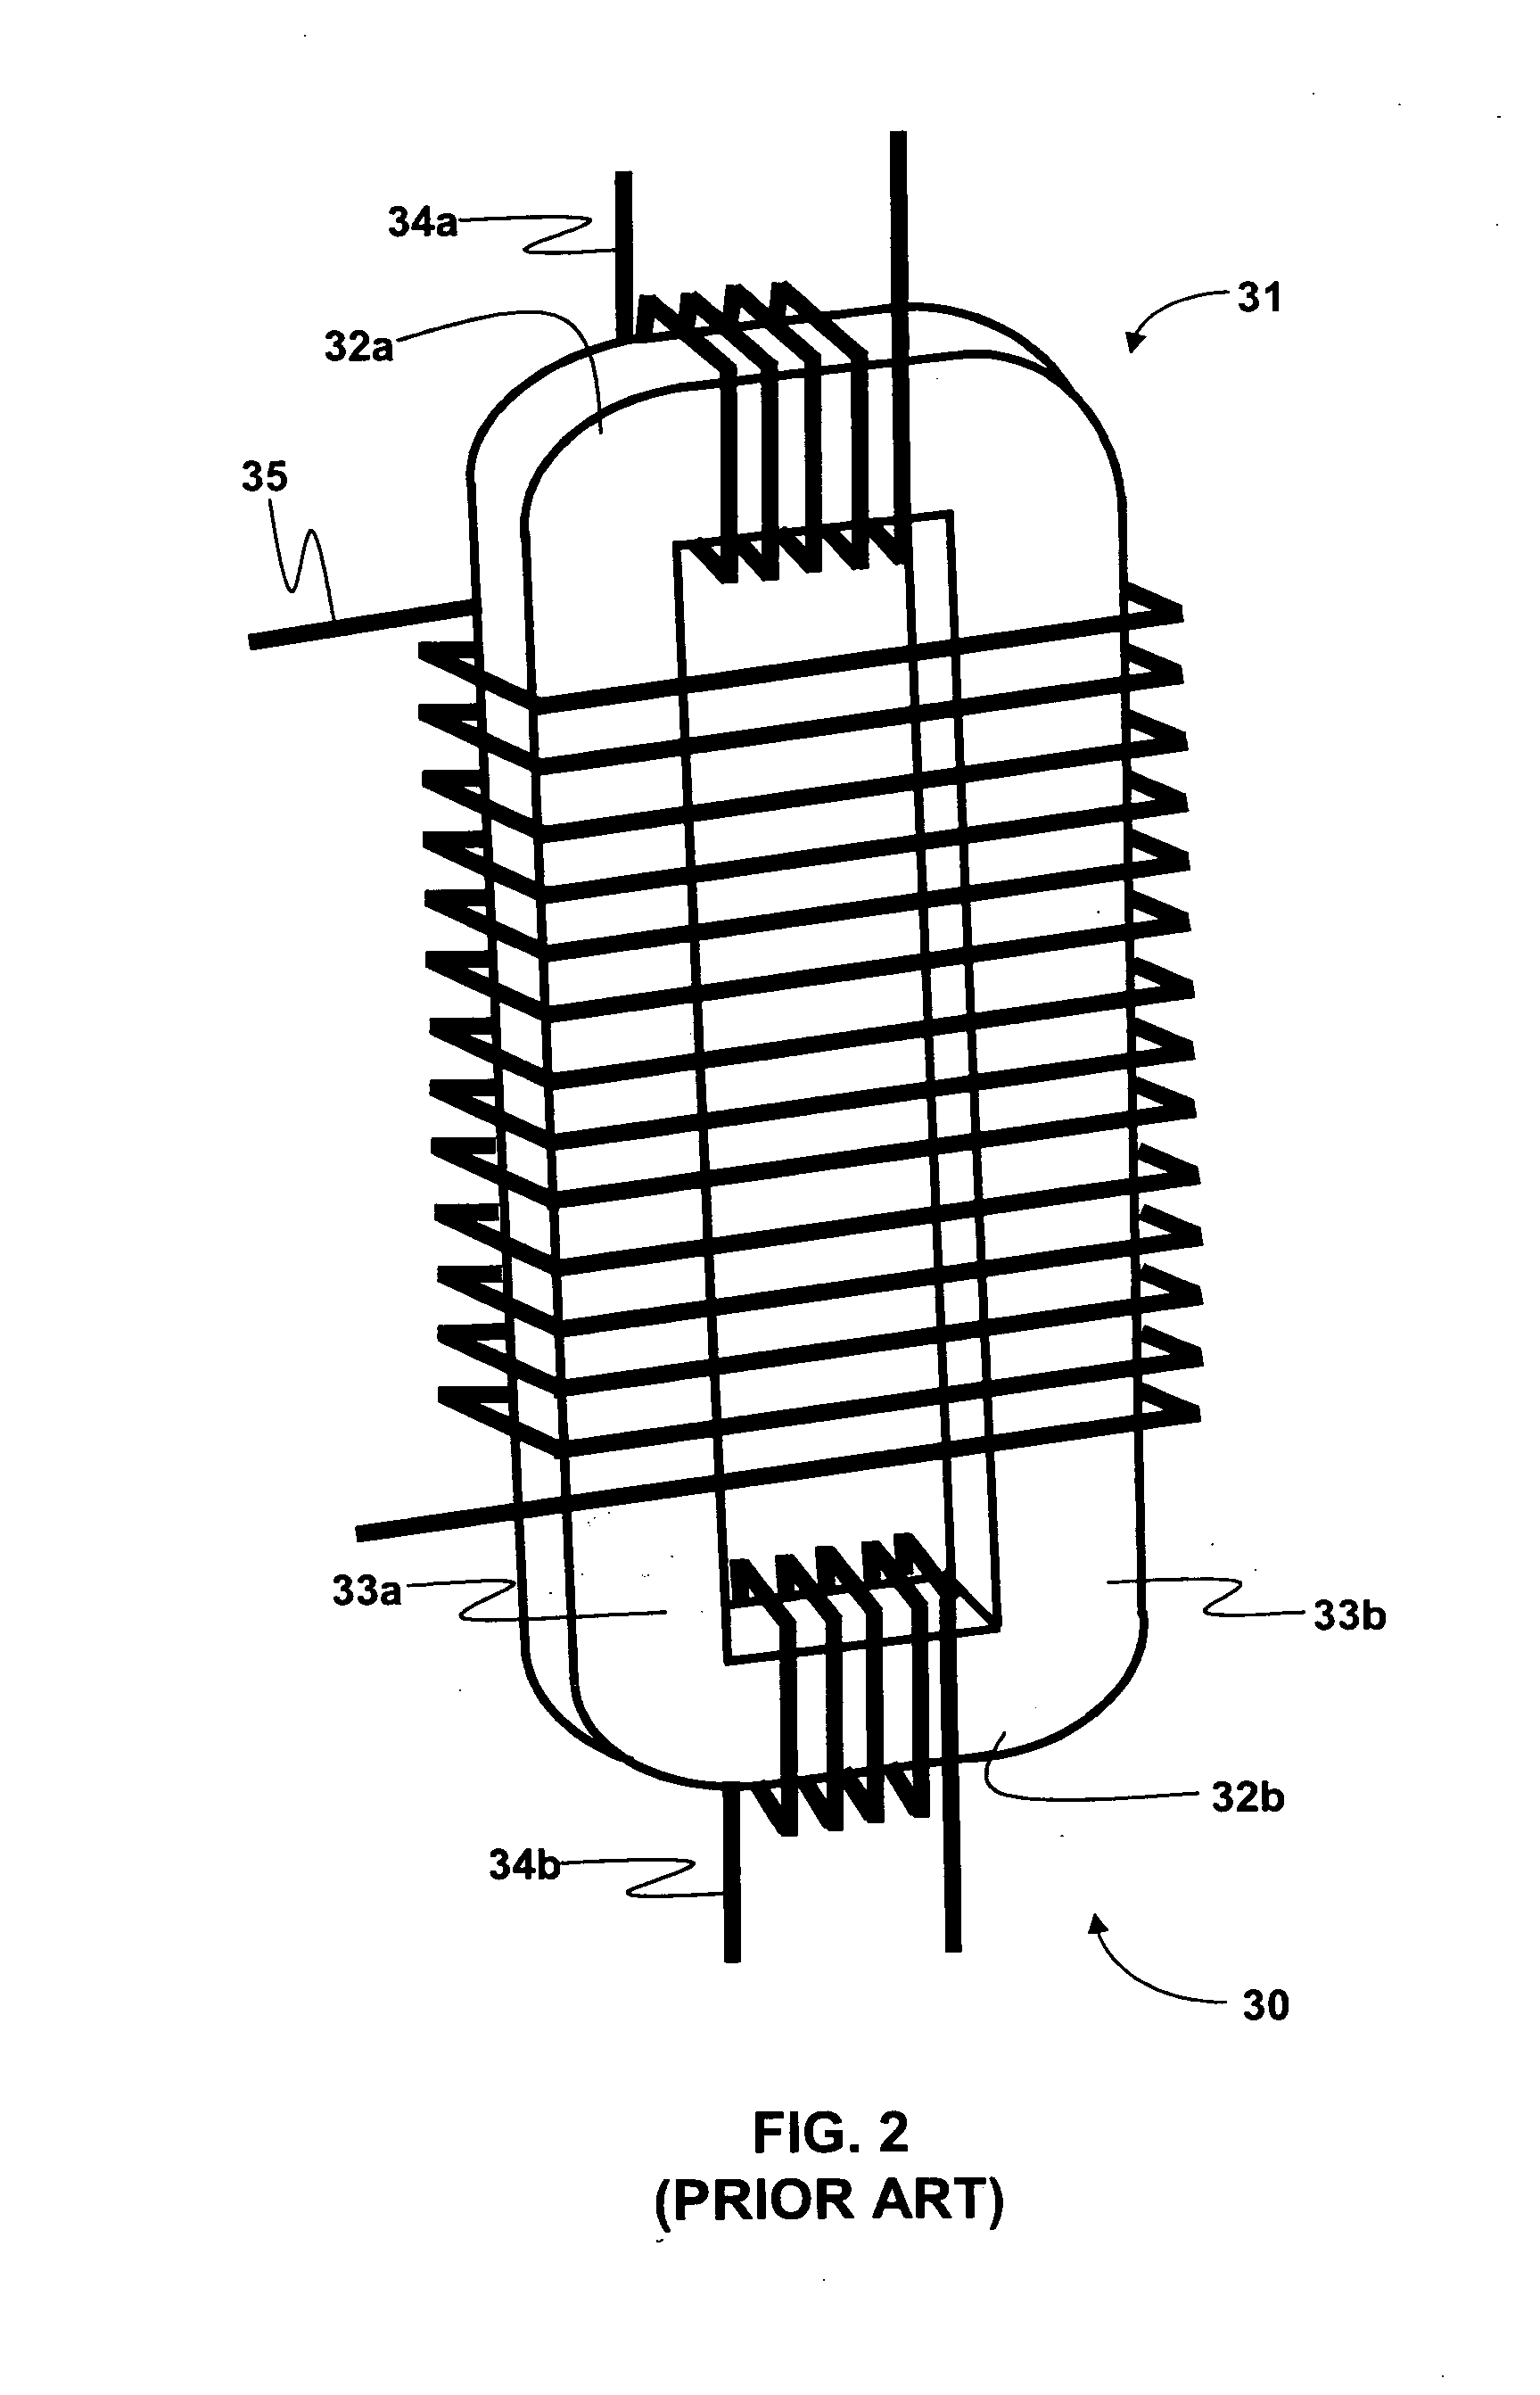 Fault current limiter with saturated core